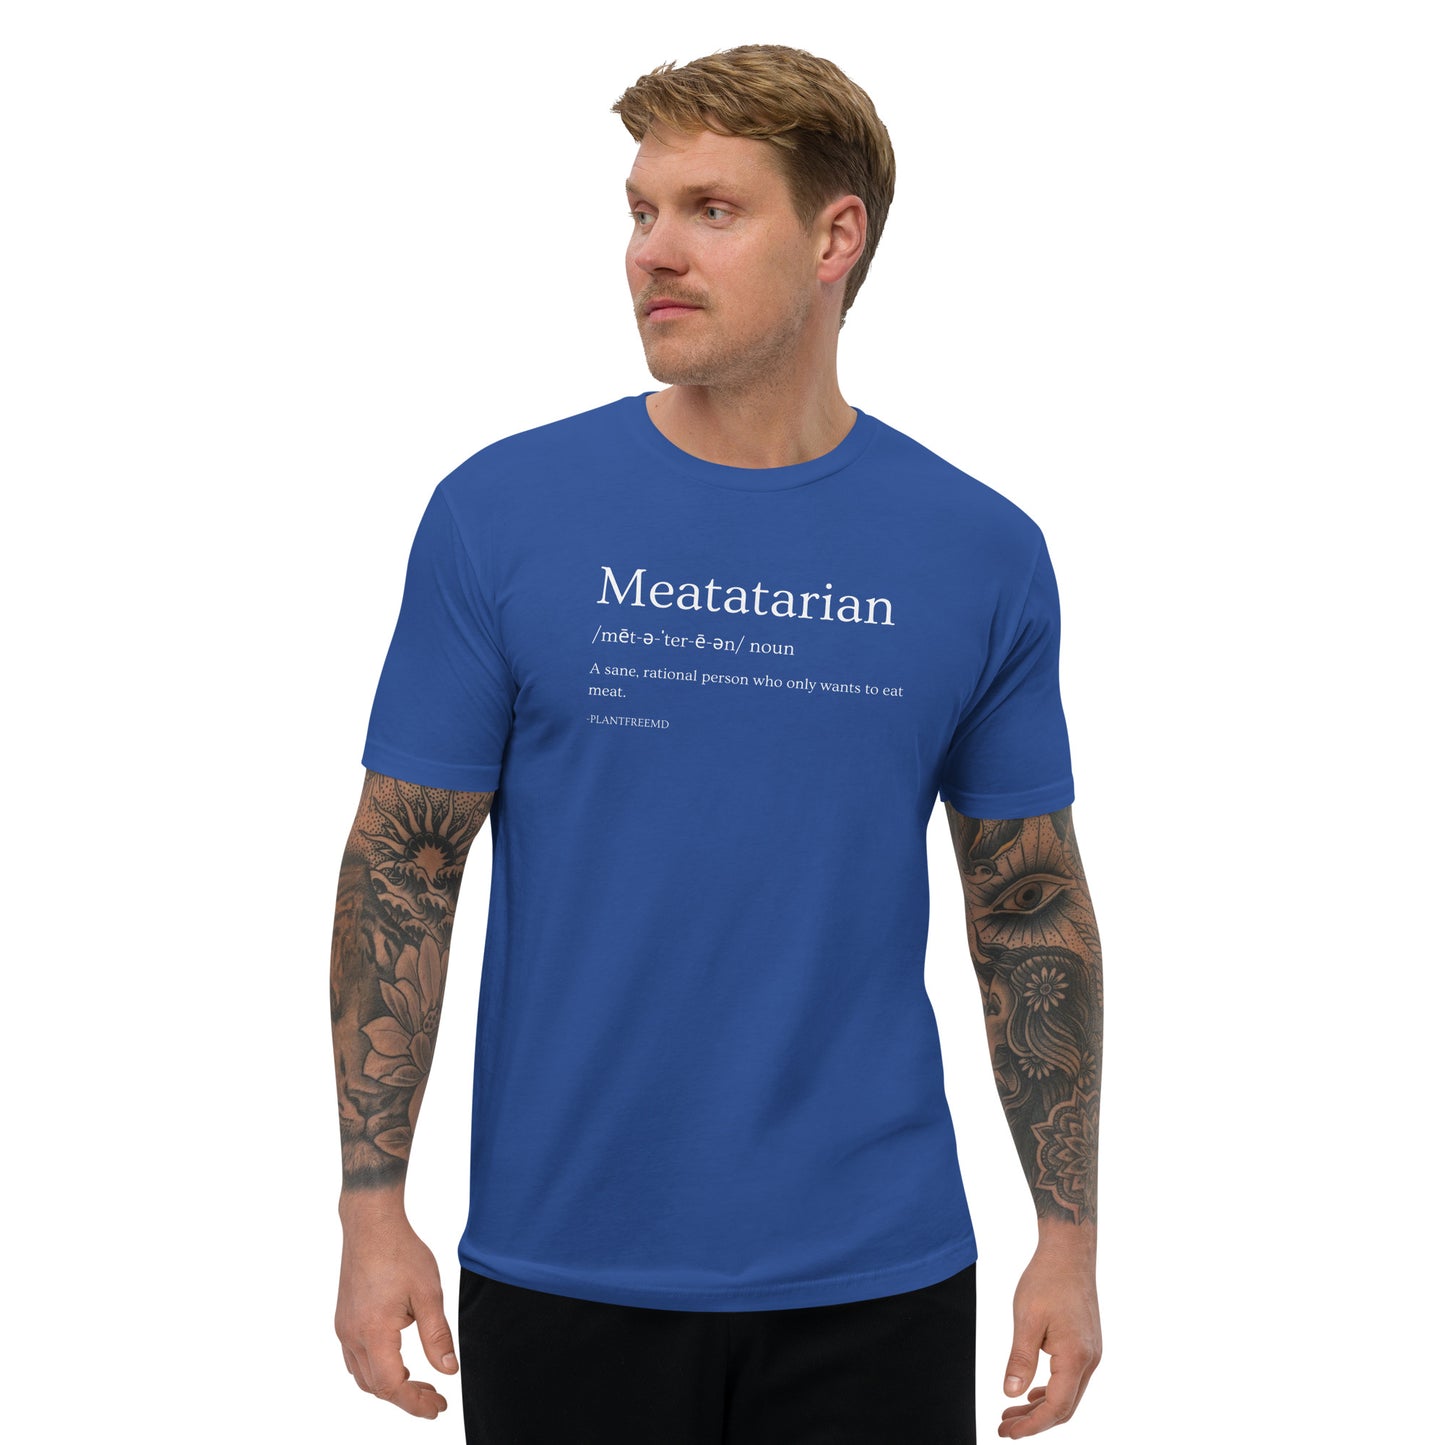 Meatatarian Men's Fitted T-shirt